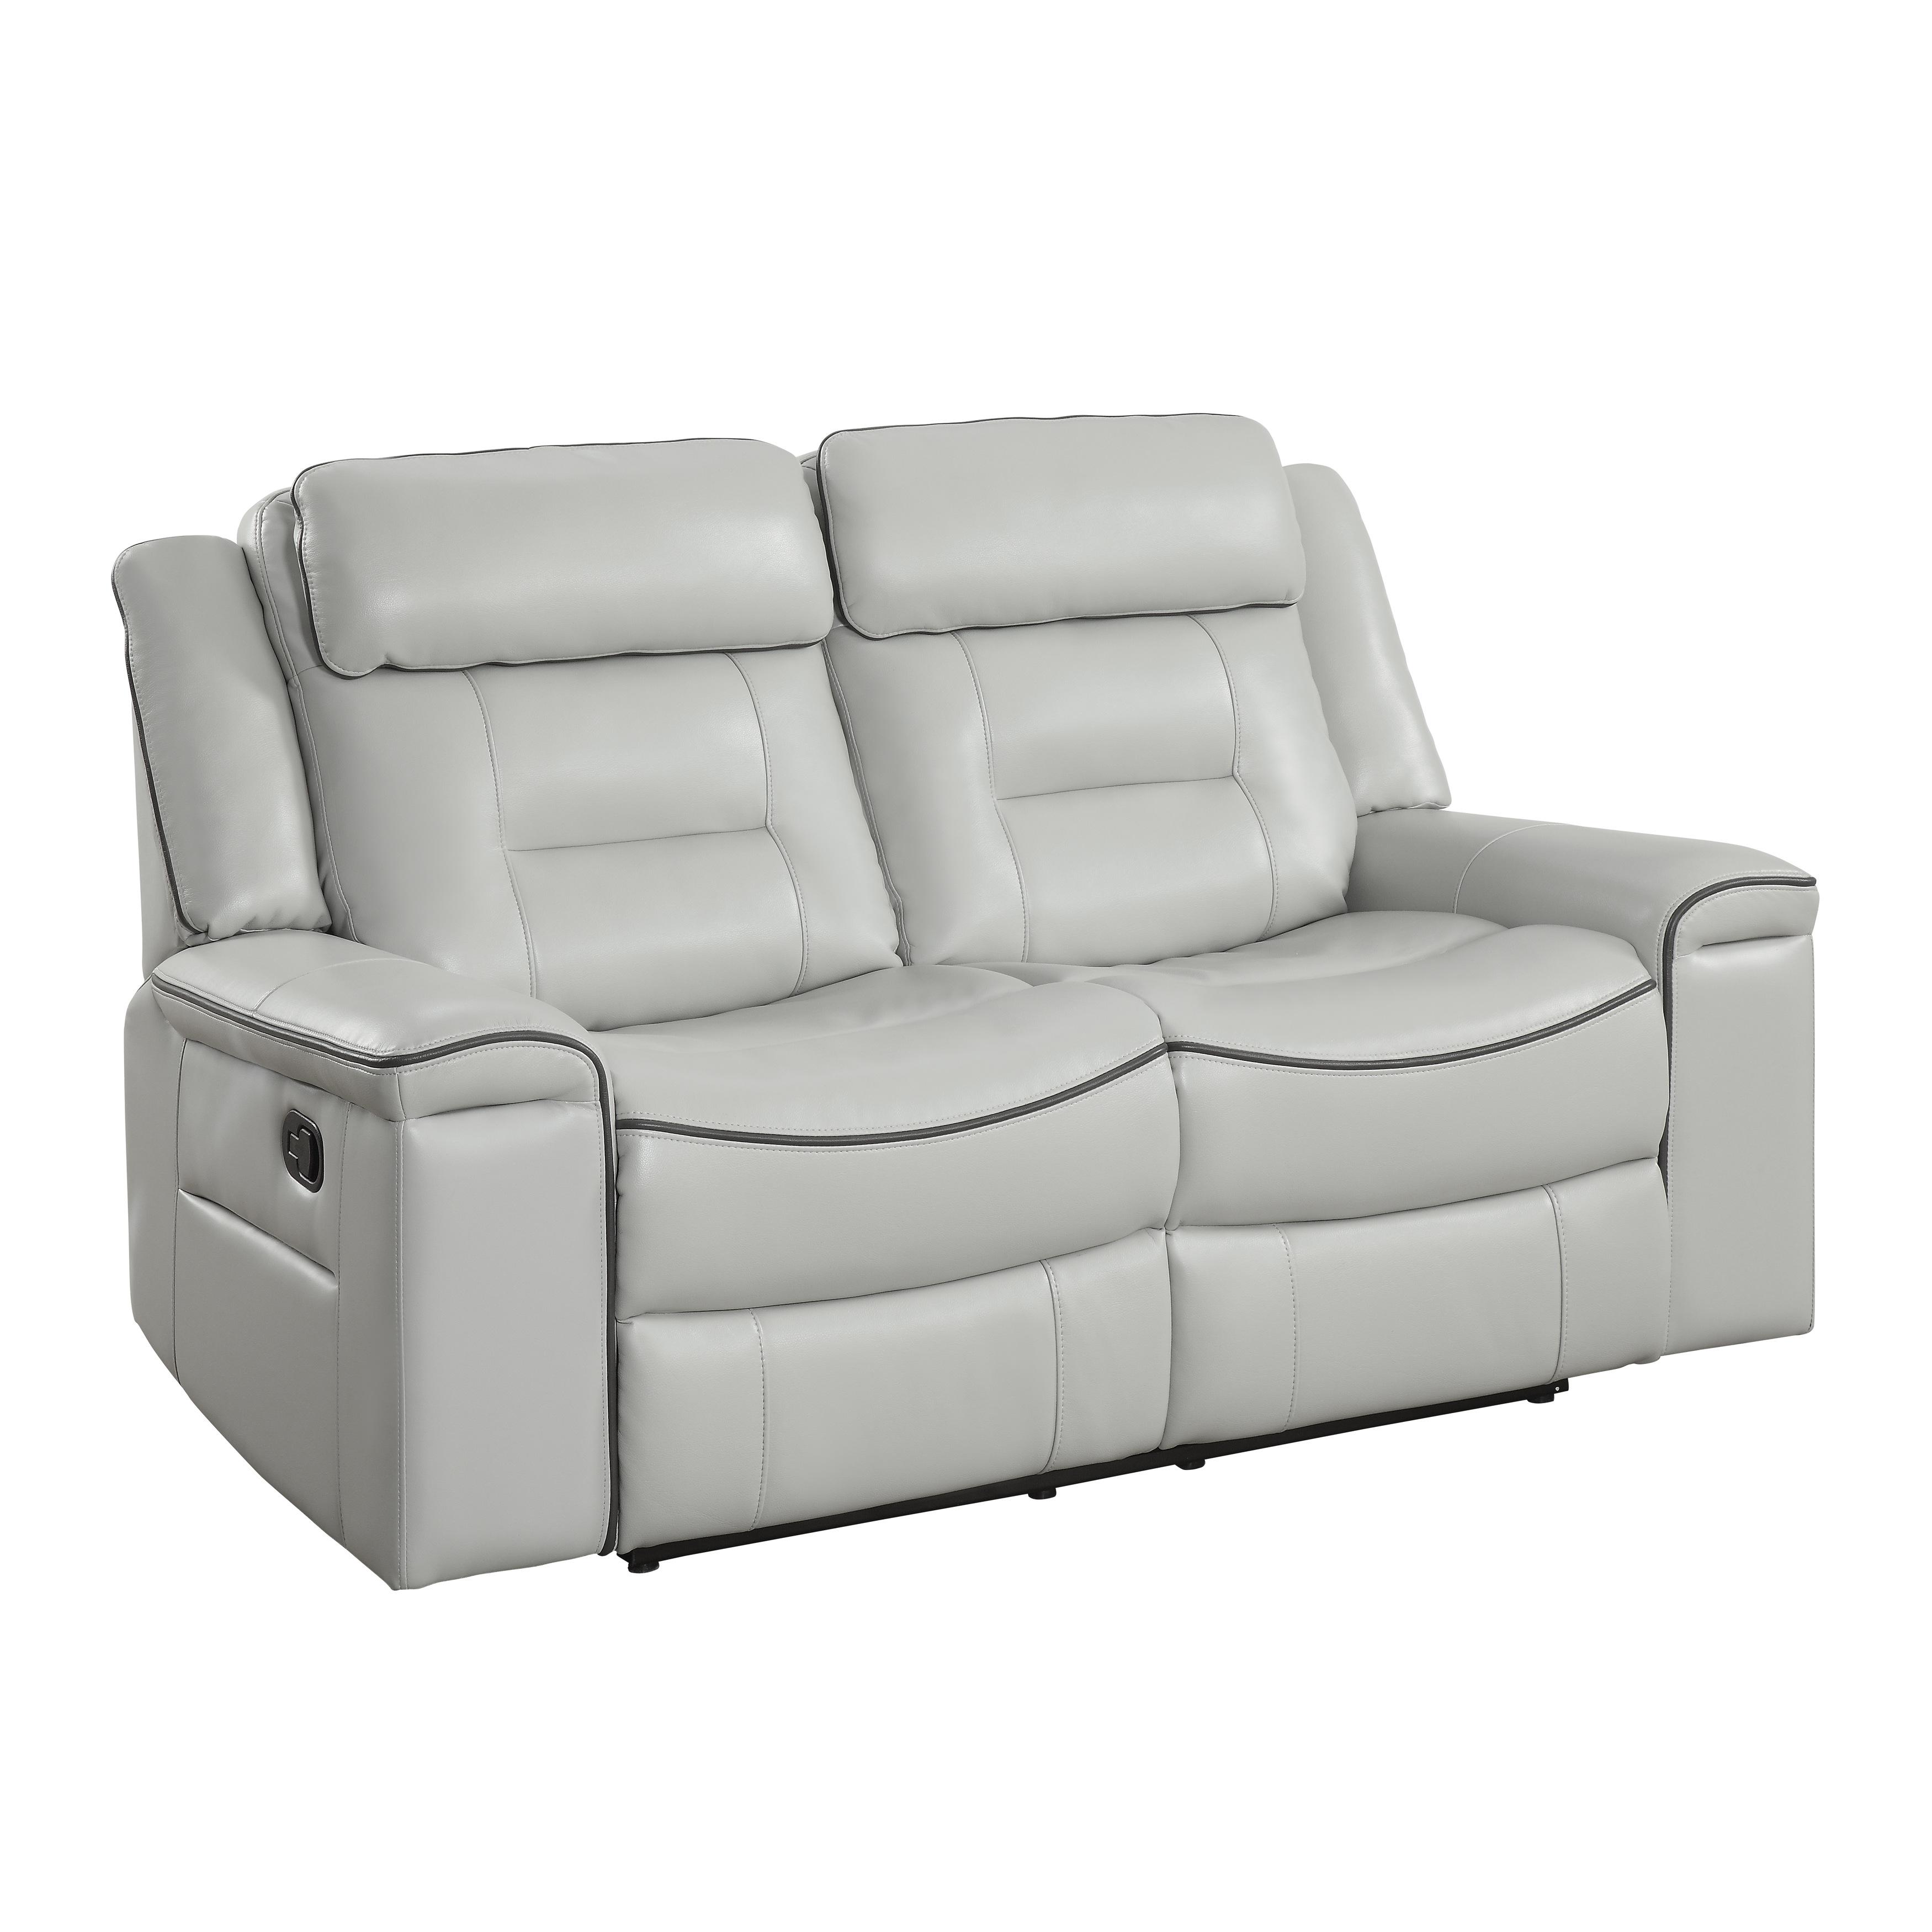 

    
Contemporary Light Gray Faux Leather Reclining Loveseat Homelegance 9999GY-2 Darwan
